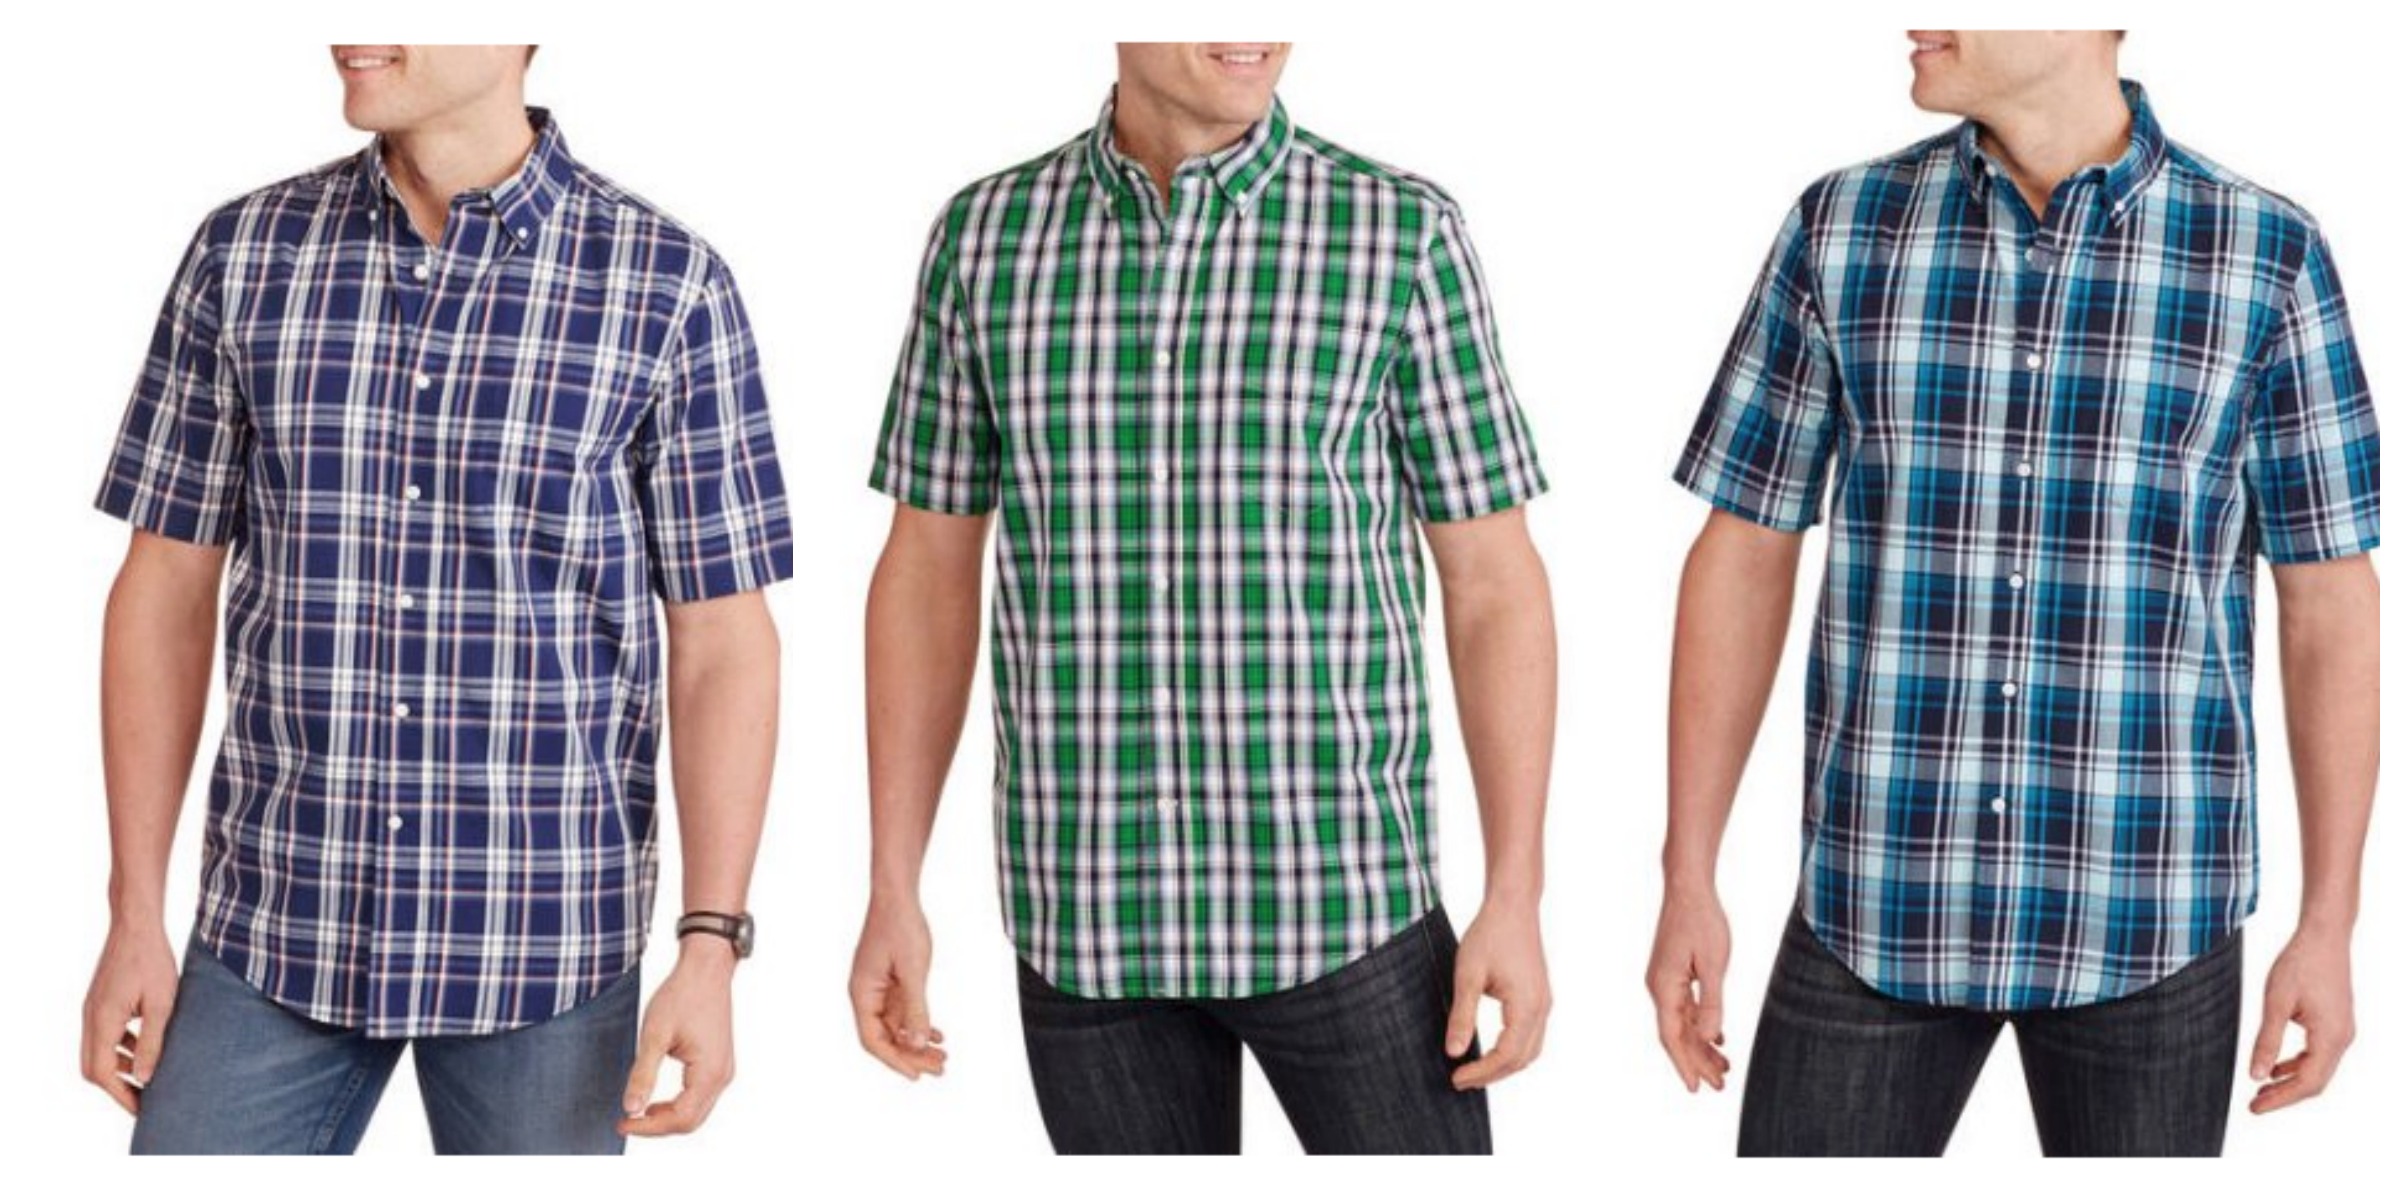 WOW! Men’s George Short Sleeve Plaid Woven Shirt Only $5.43 + FREE Pick Up! (Reg. $8.44)